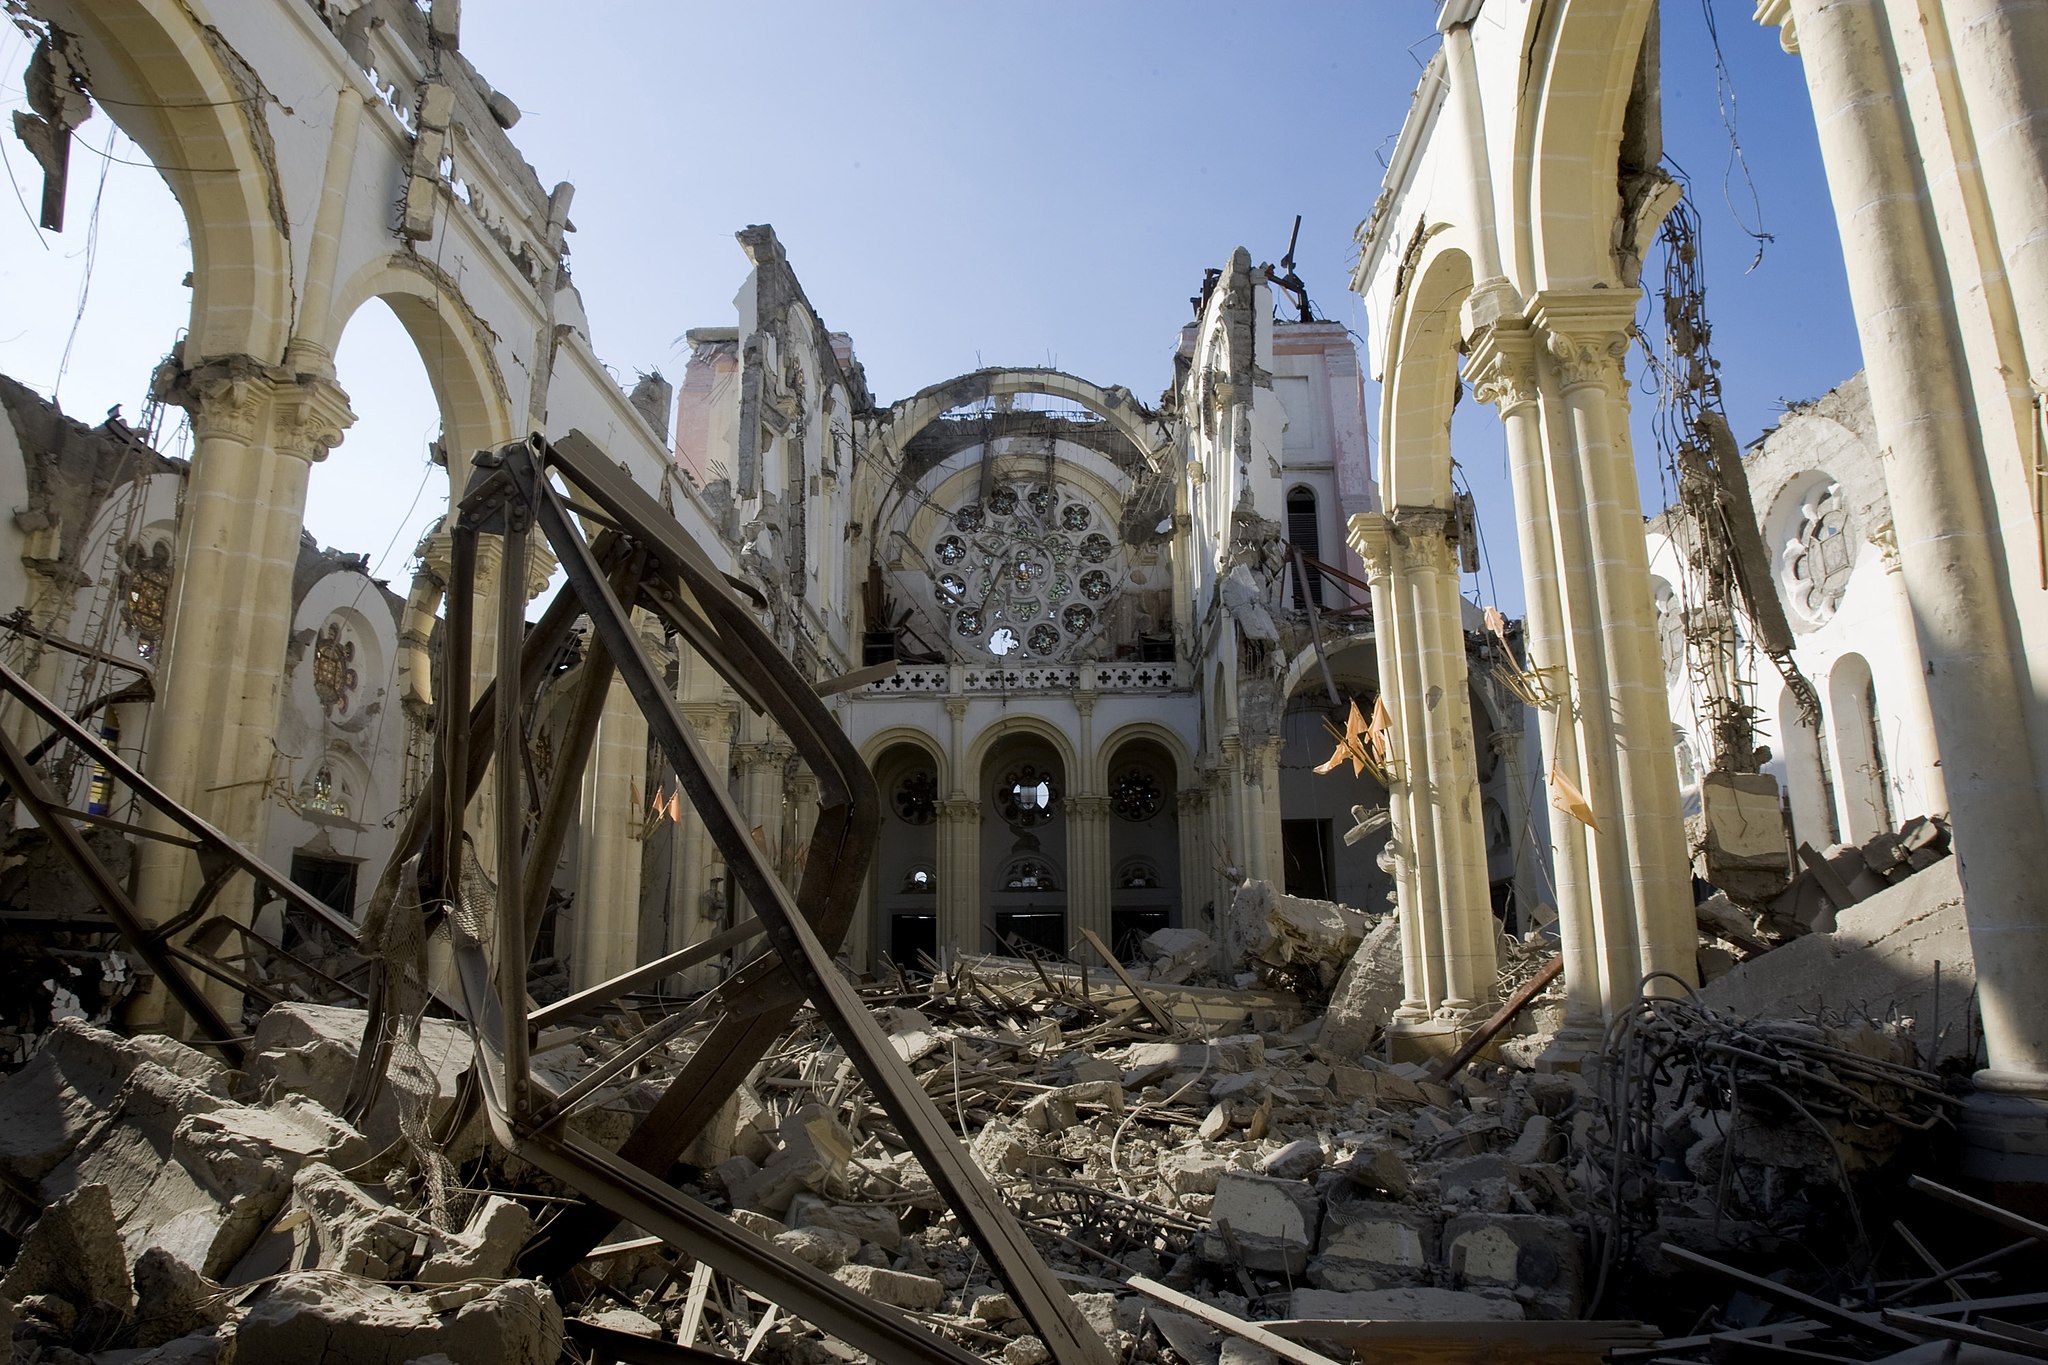 rubbles of the cathedral after the earthquake that his the capital port au prince, haiti in january 2010